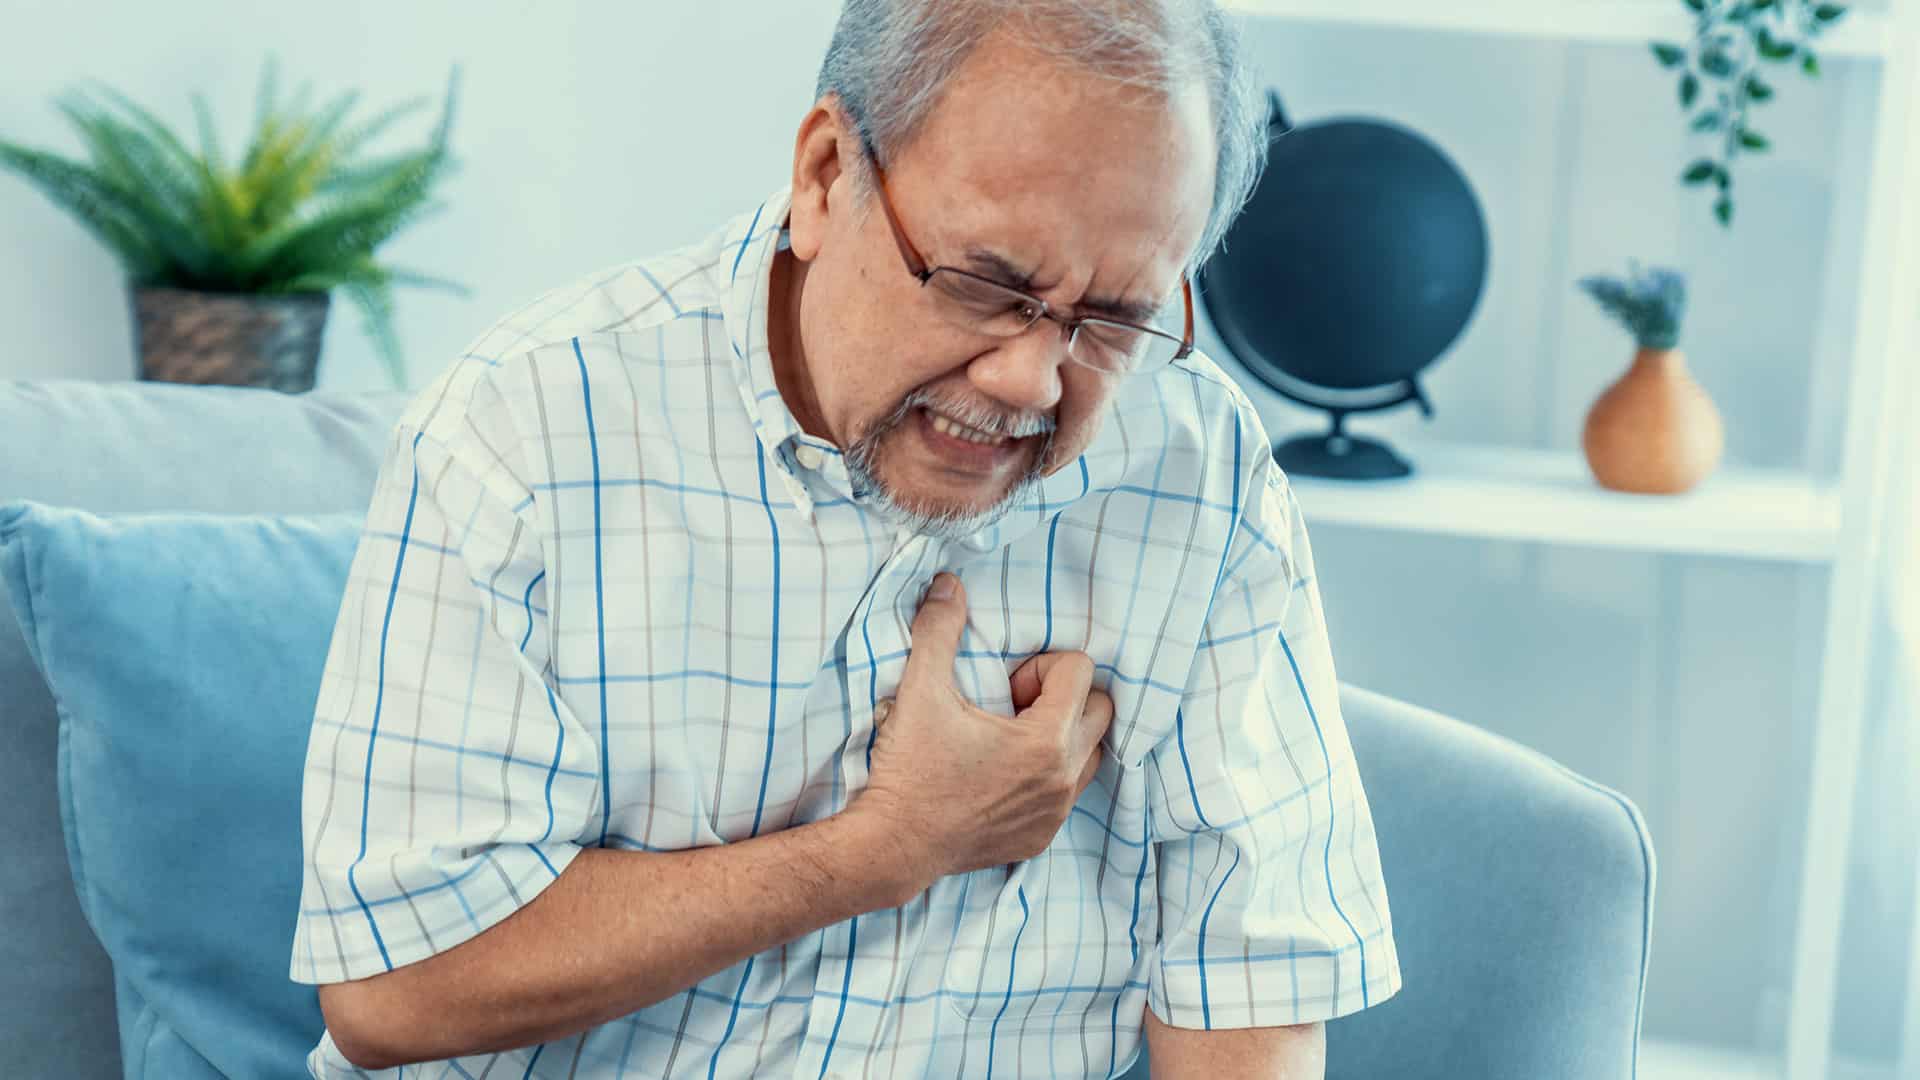 6 Medical Tests To Diagnose Heart Problems